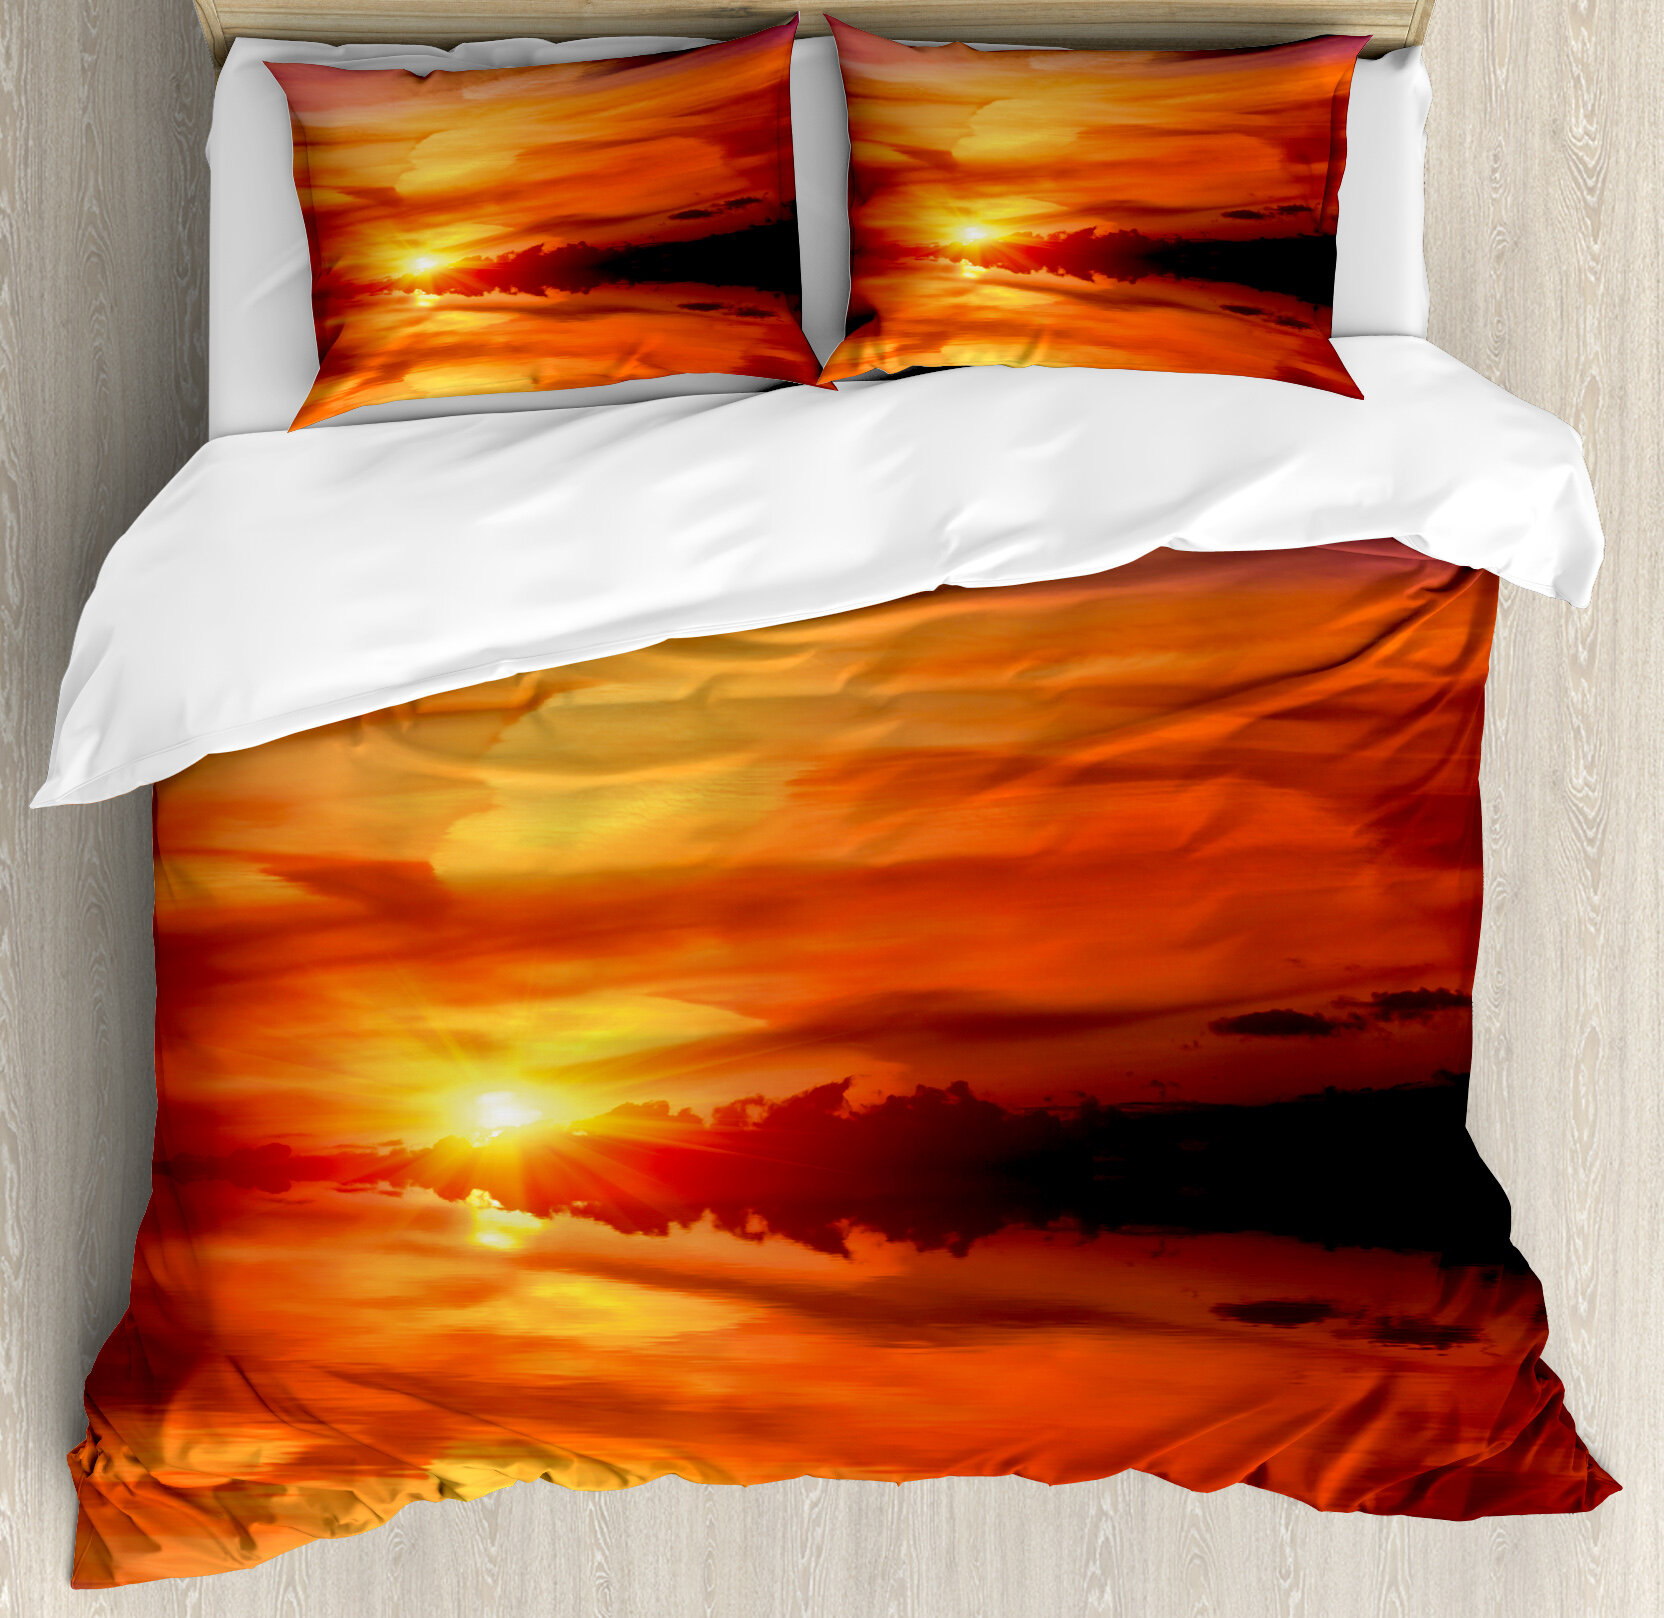 Nature Quilted Bedspread /& Pillow Shams Set Dramatic Sunset Lake Print